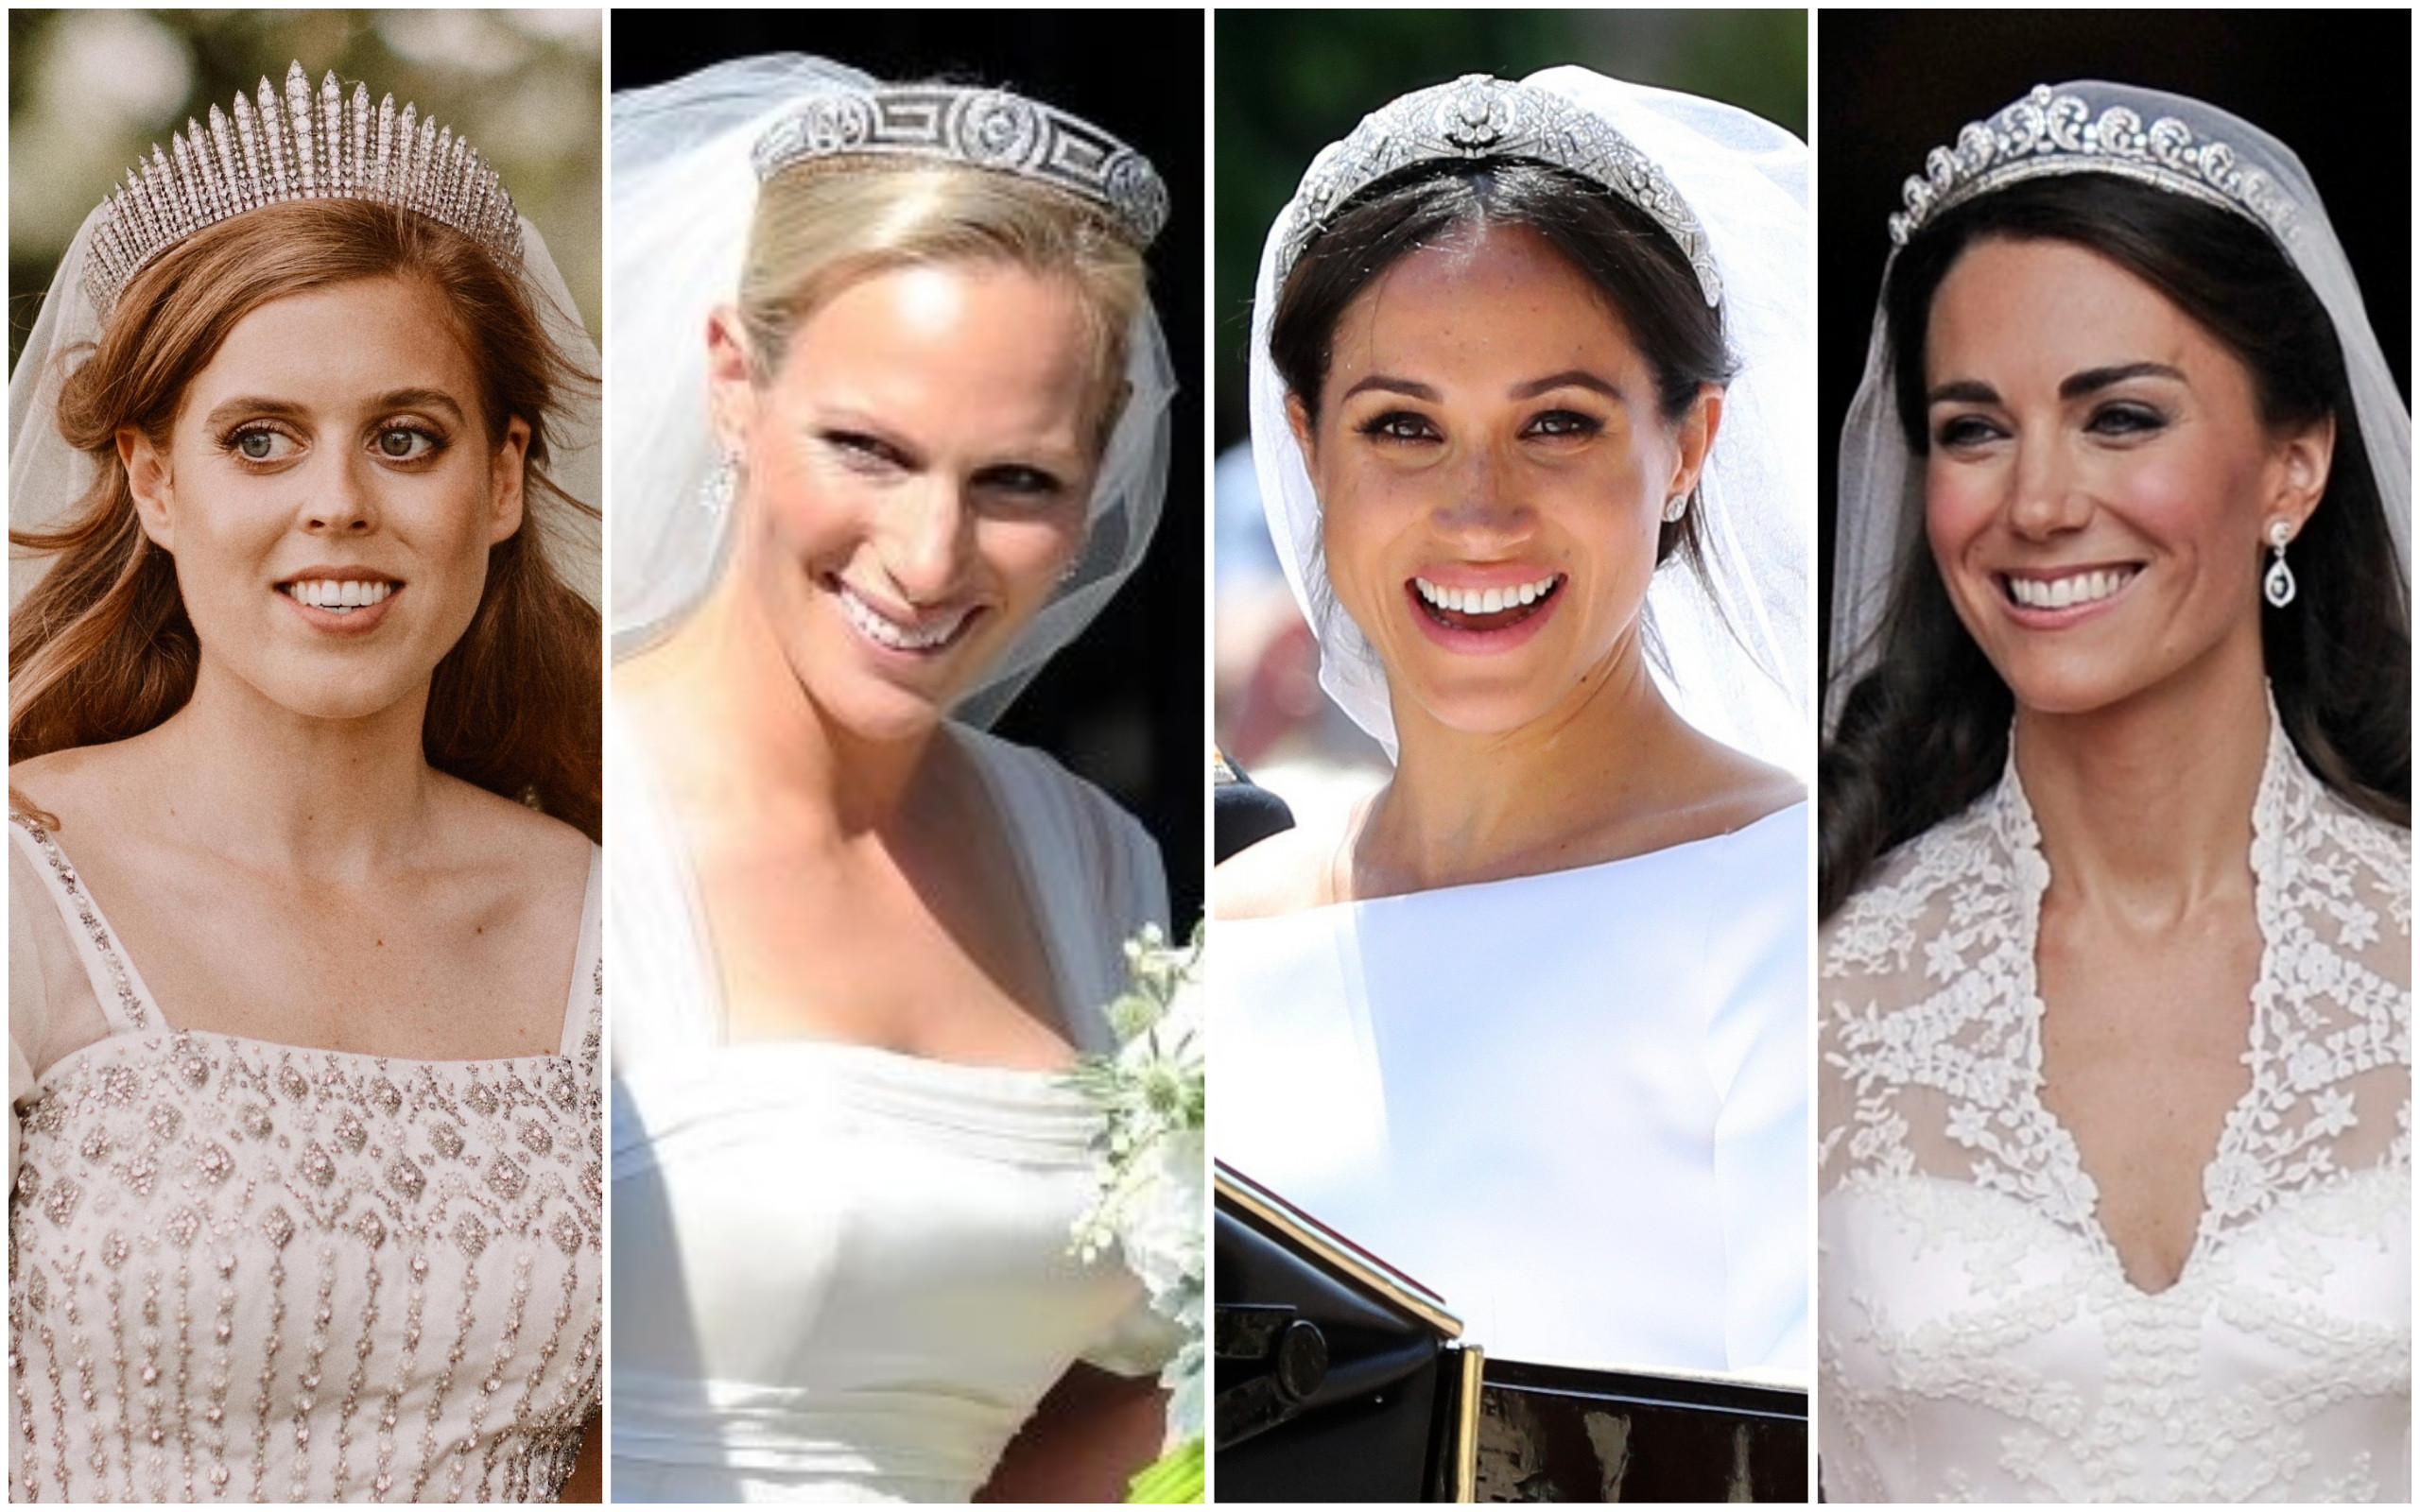 Princess Beatrice, Zara Tindall, Meghan Markle and Kate Middleton all got to delve into the royal jewellery box for their big day. Photo: Reuters, AP, @people/Pinterest